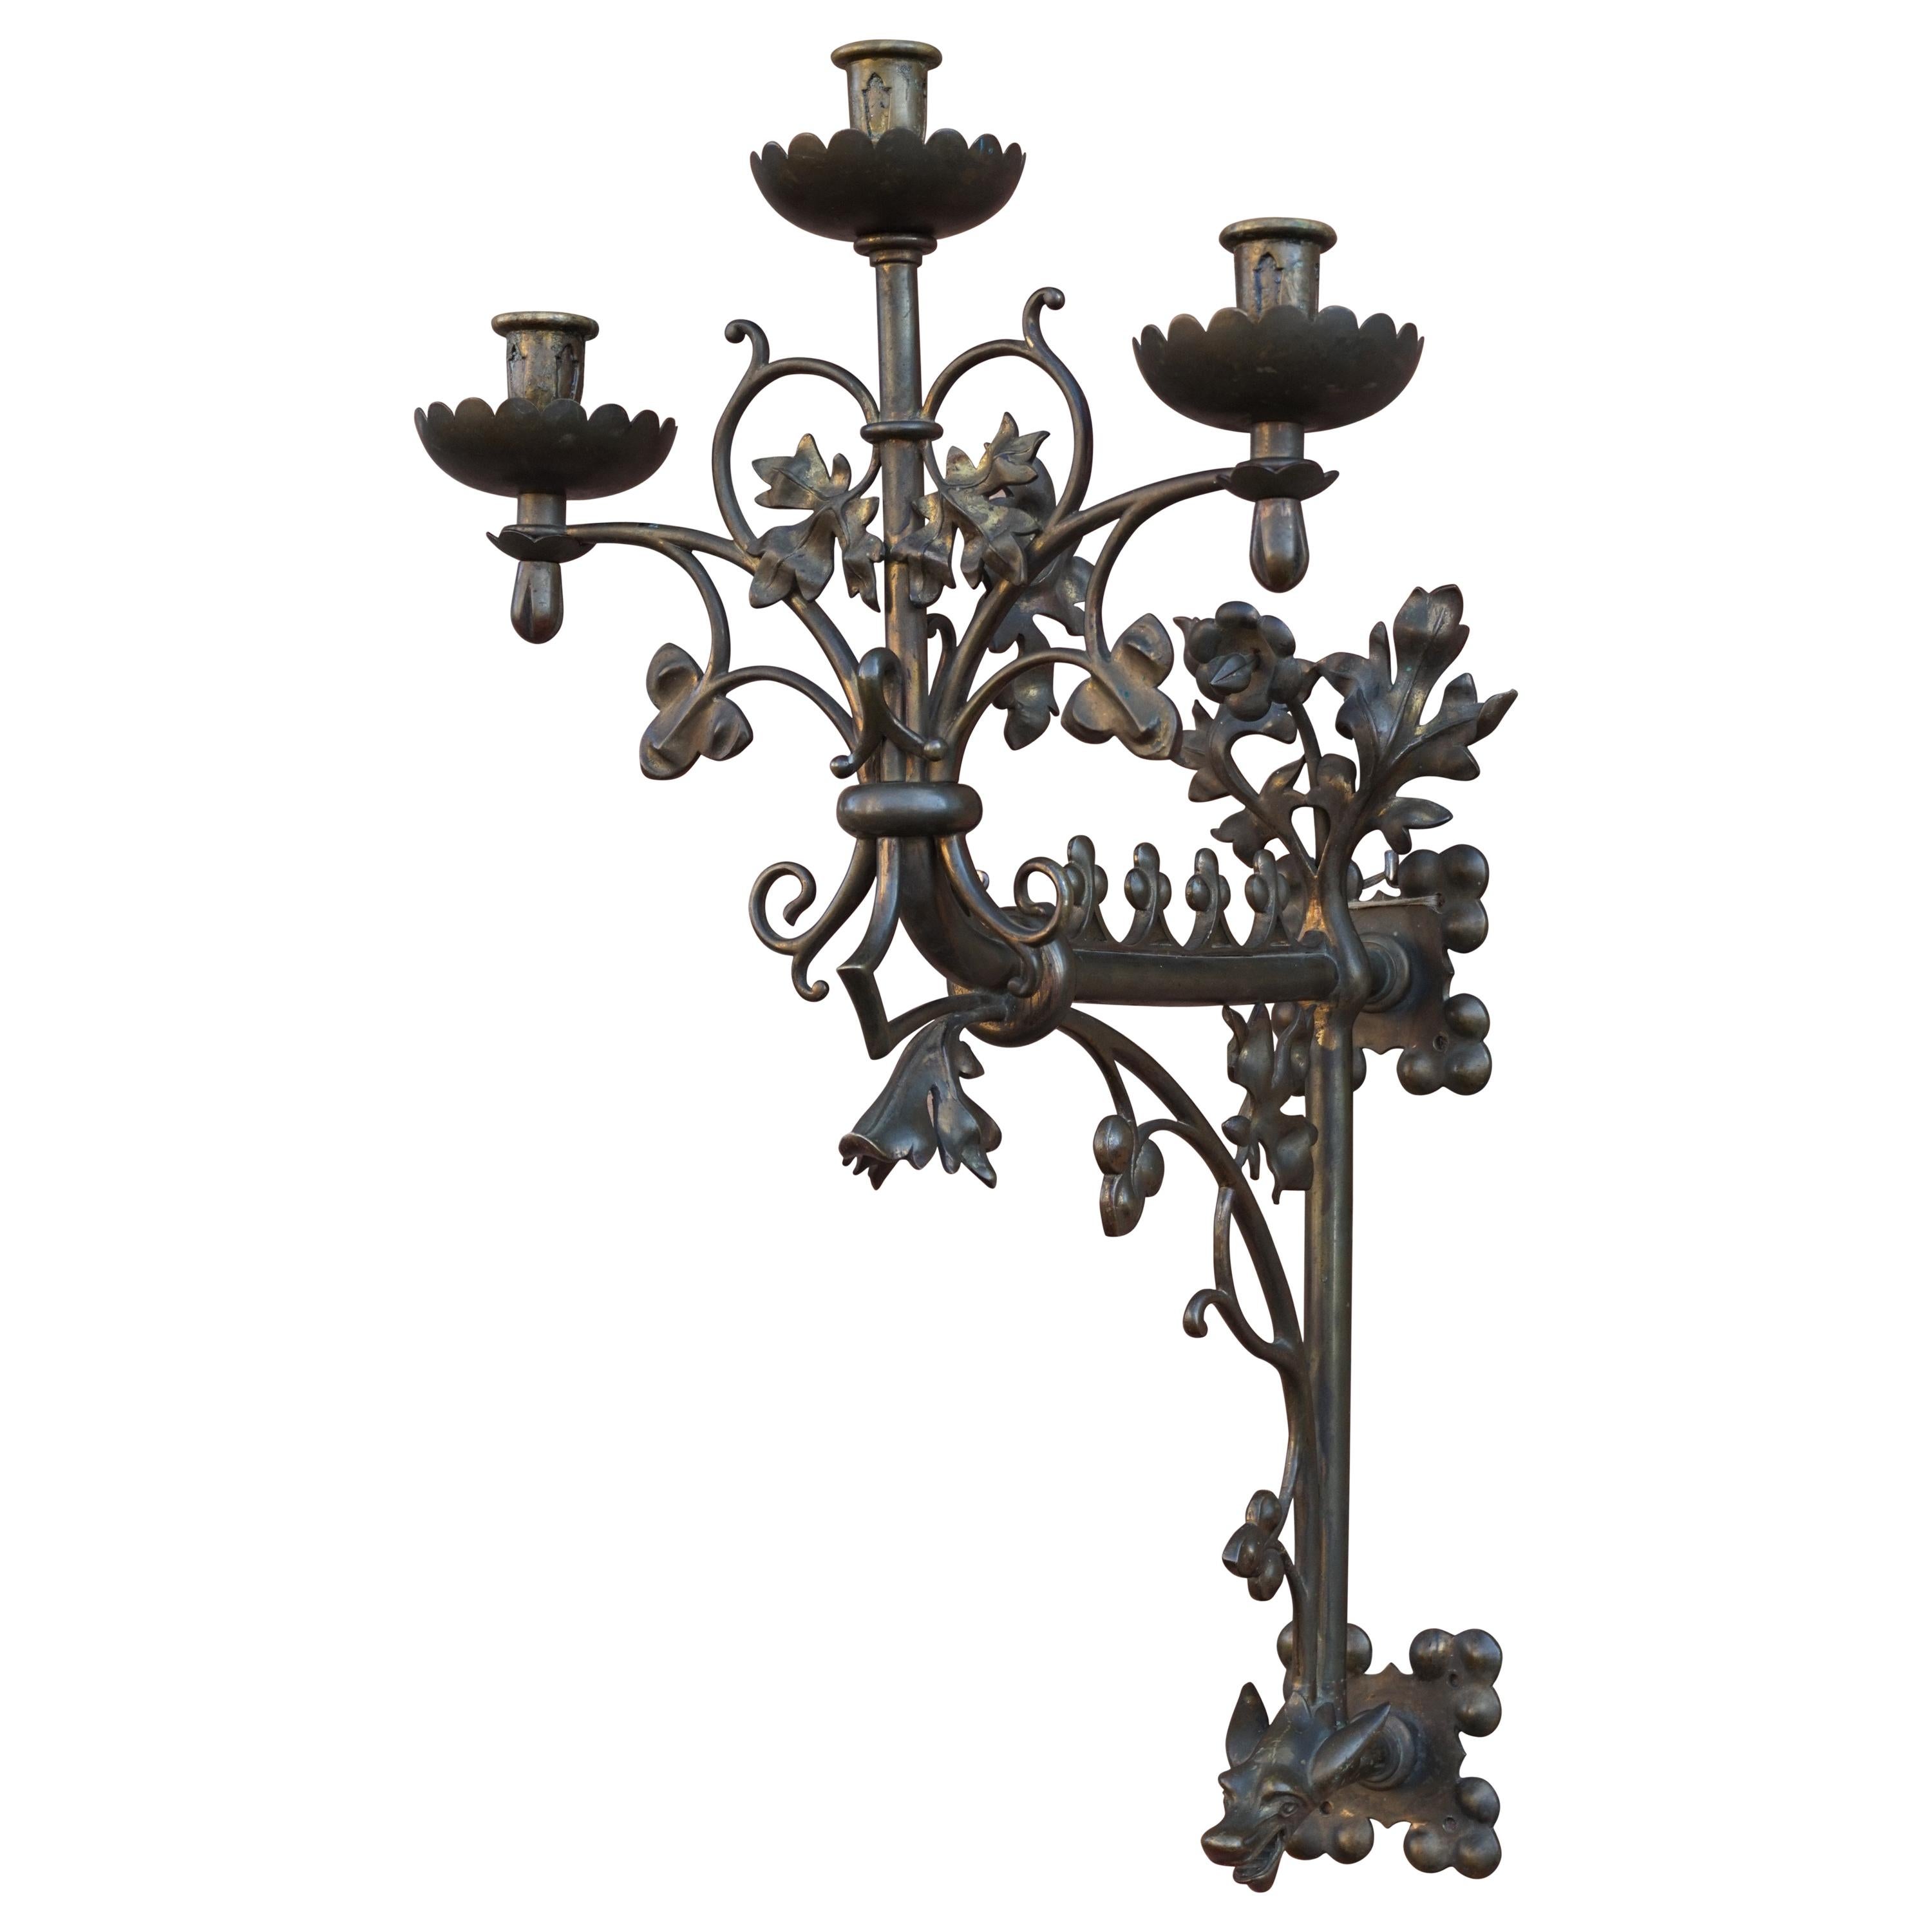 Large Gothic Revival Bronze & Brass Wall Candelabra/Candle Sconce with Gargoyle